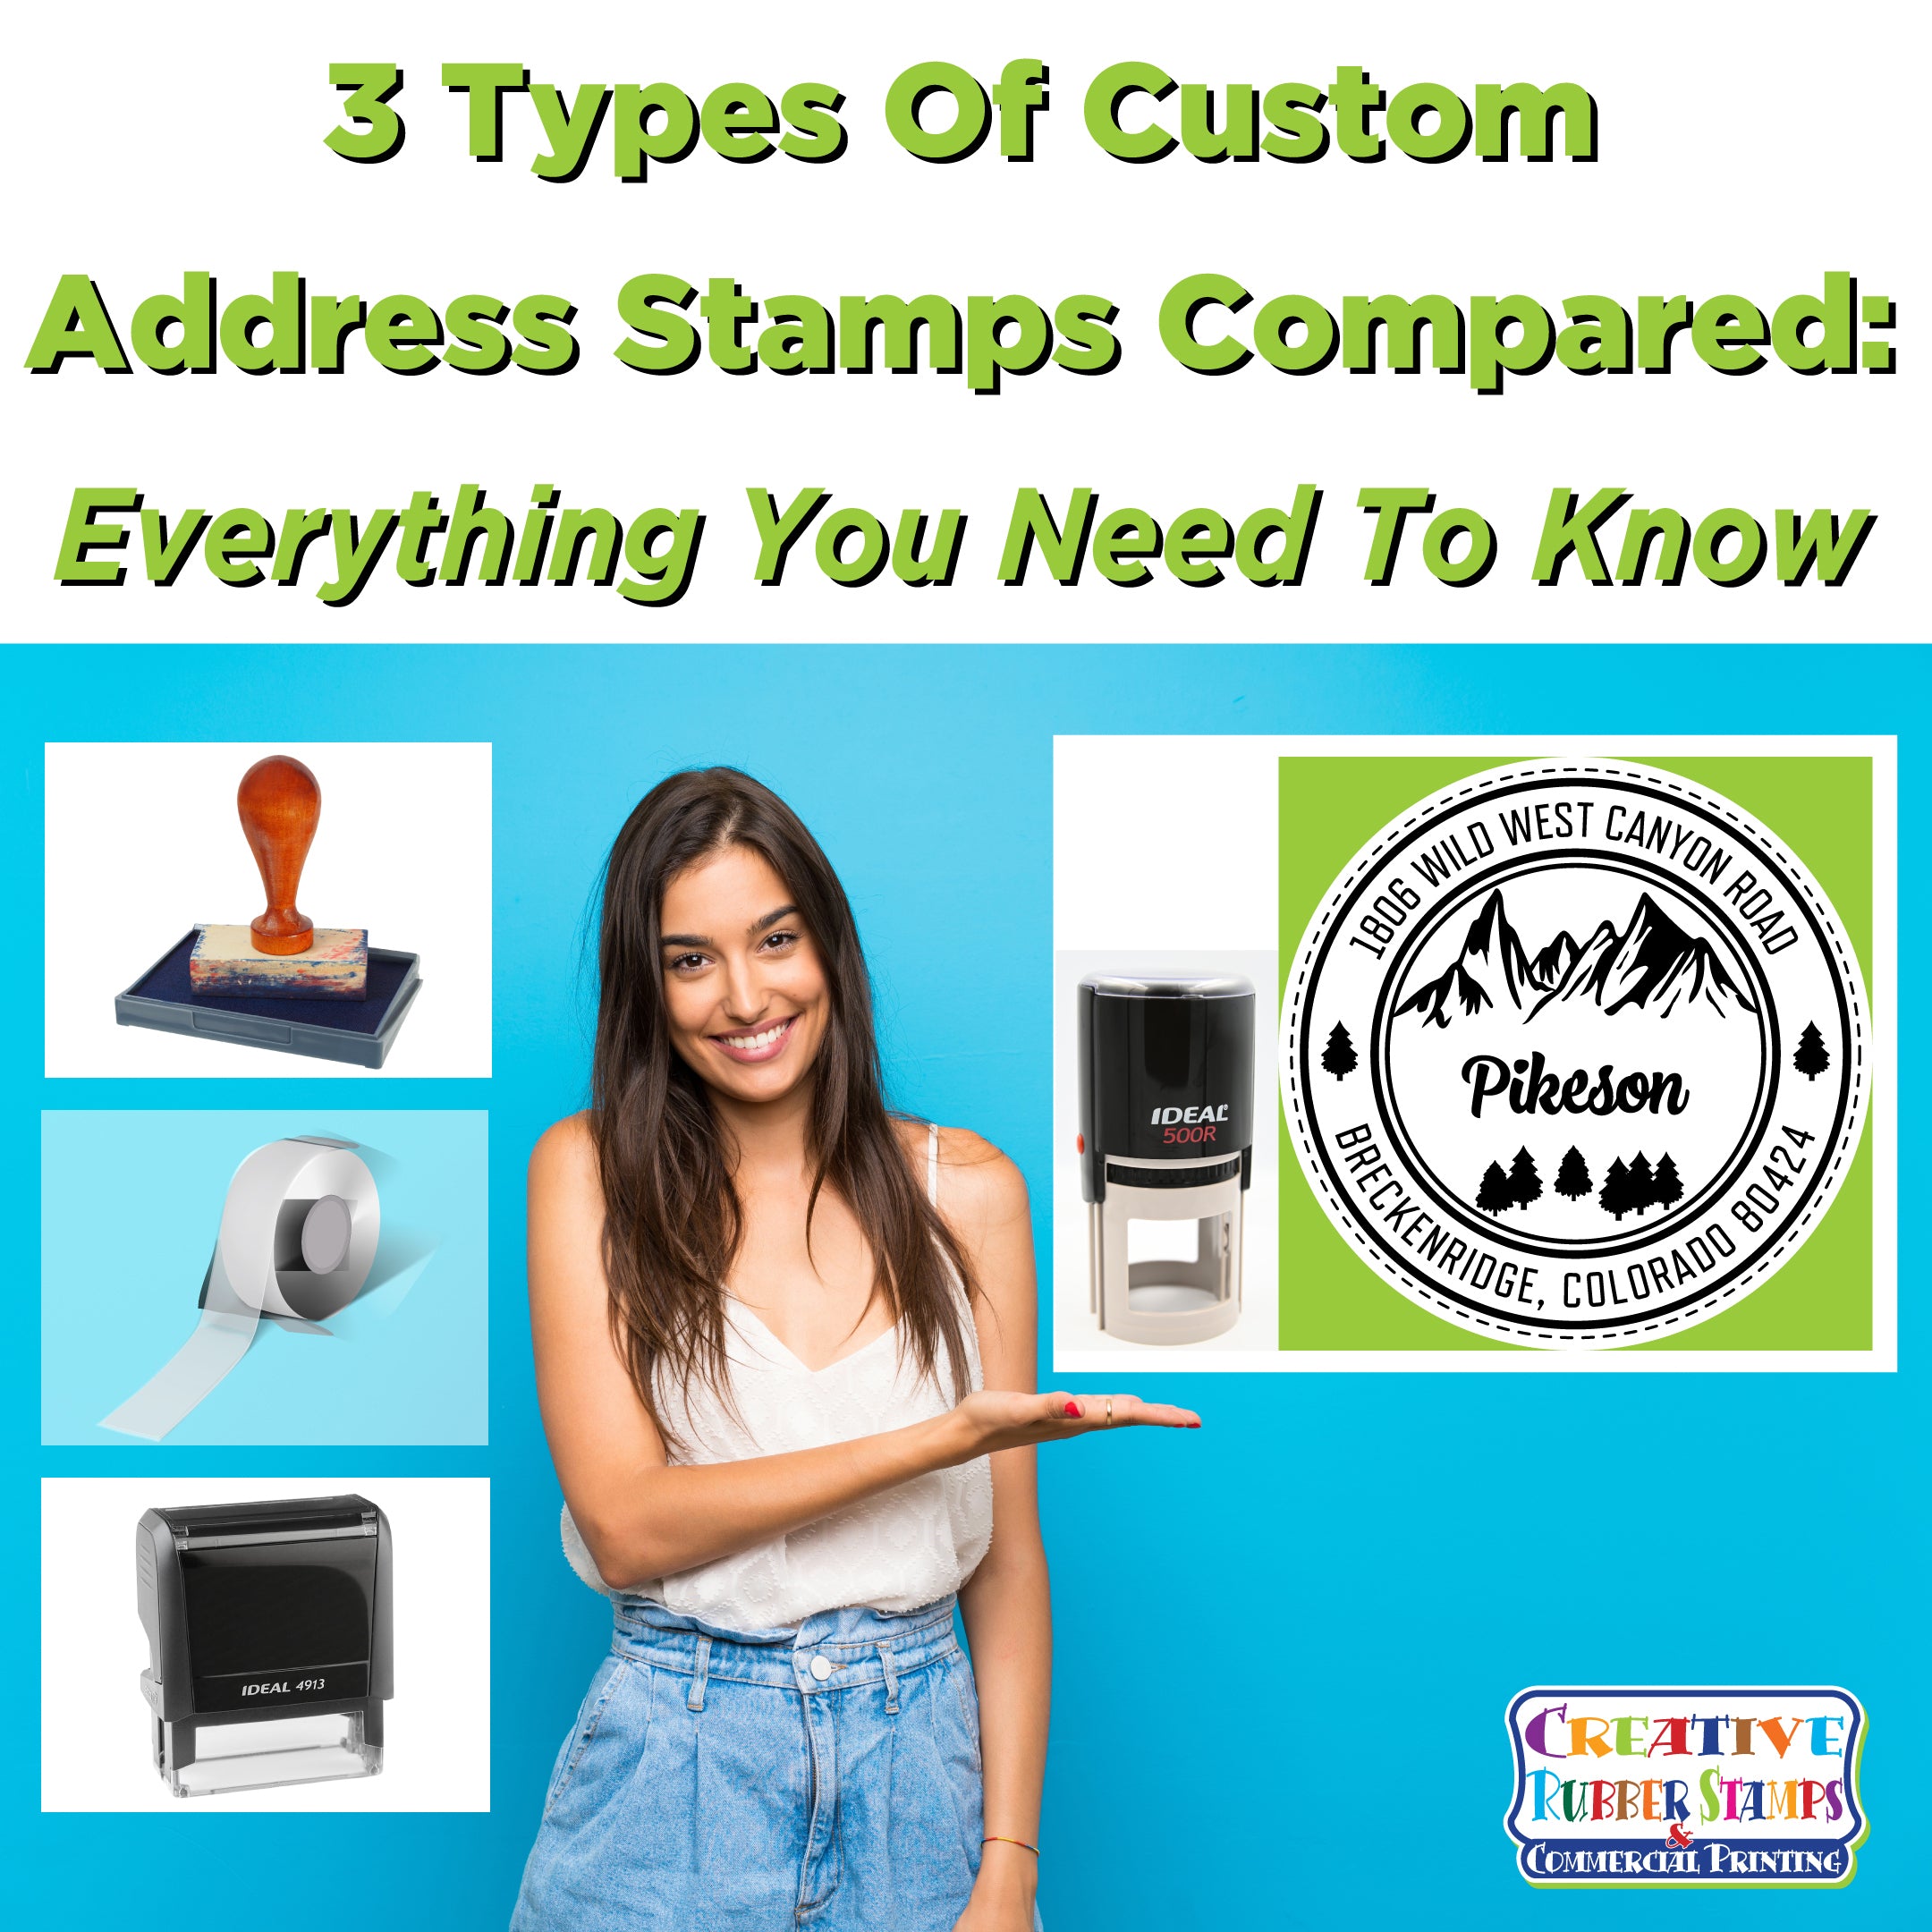 Blog - 3 Types Of Custom Address Stamps Compared – Creative Rubber Stamps